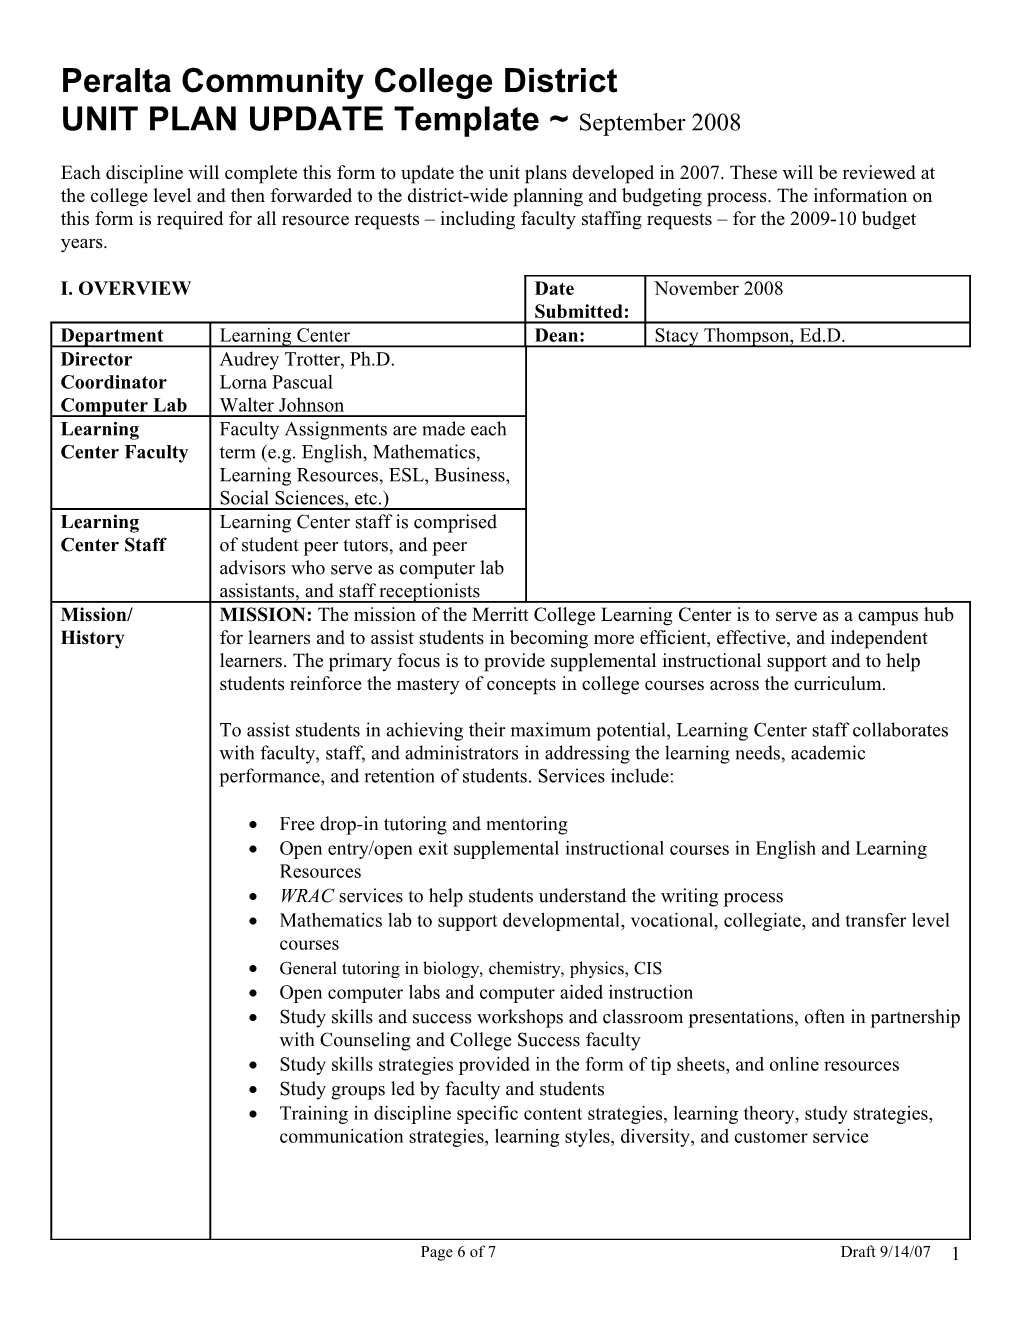 Each Discipline Will Complete This Form to Update the Unit Plans Developed in 2007. These